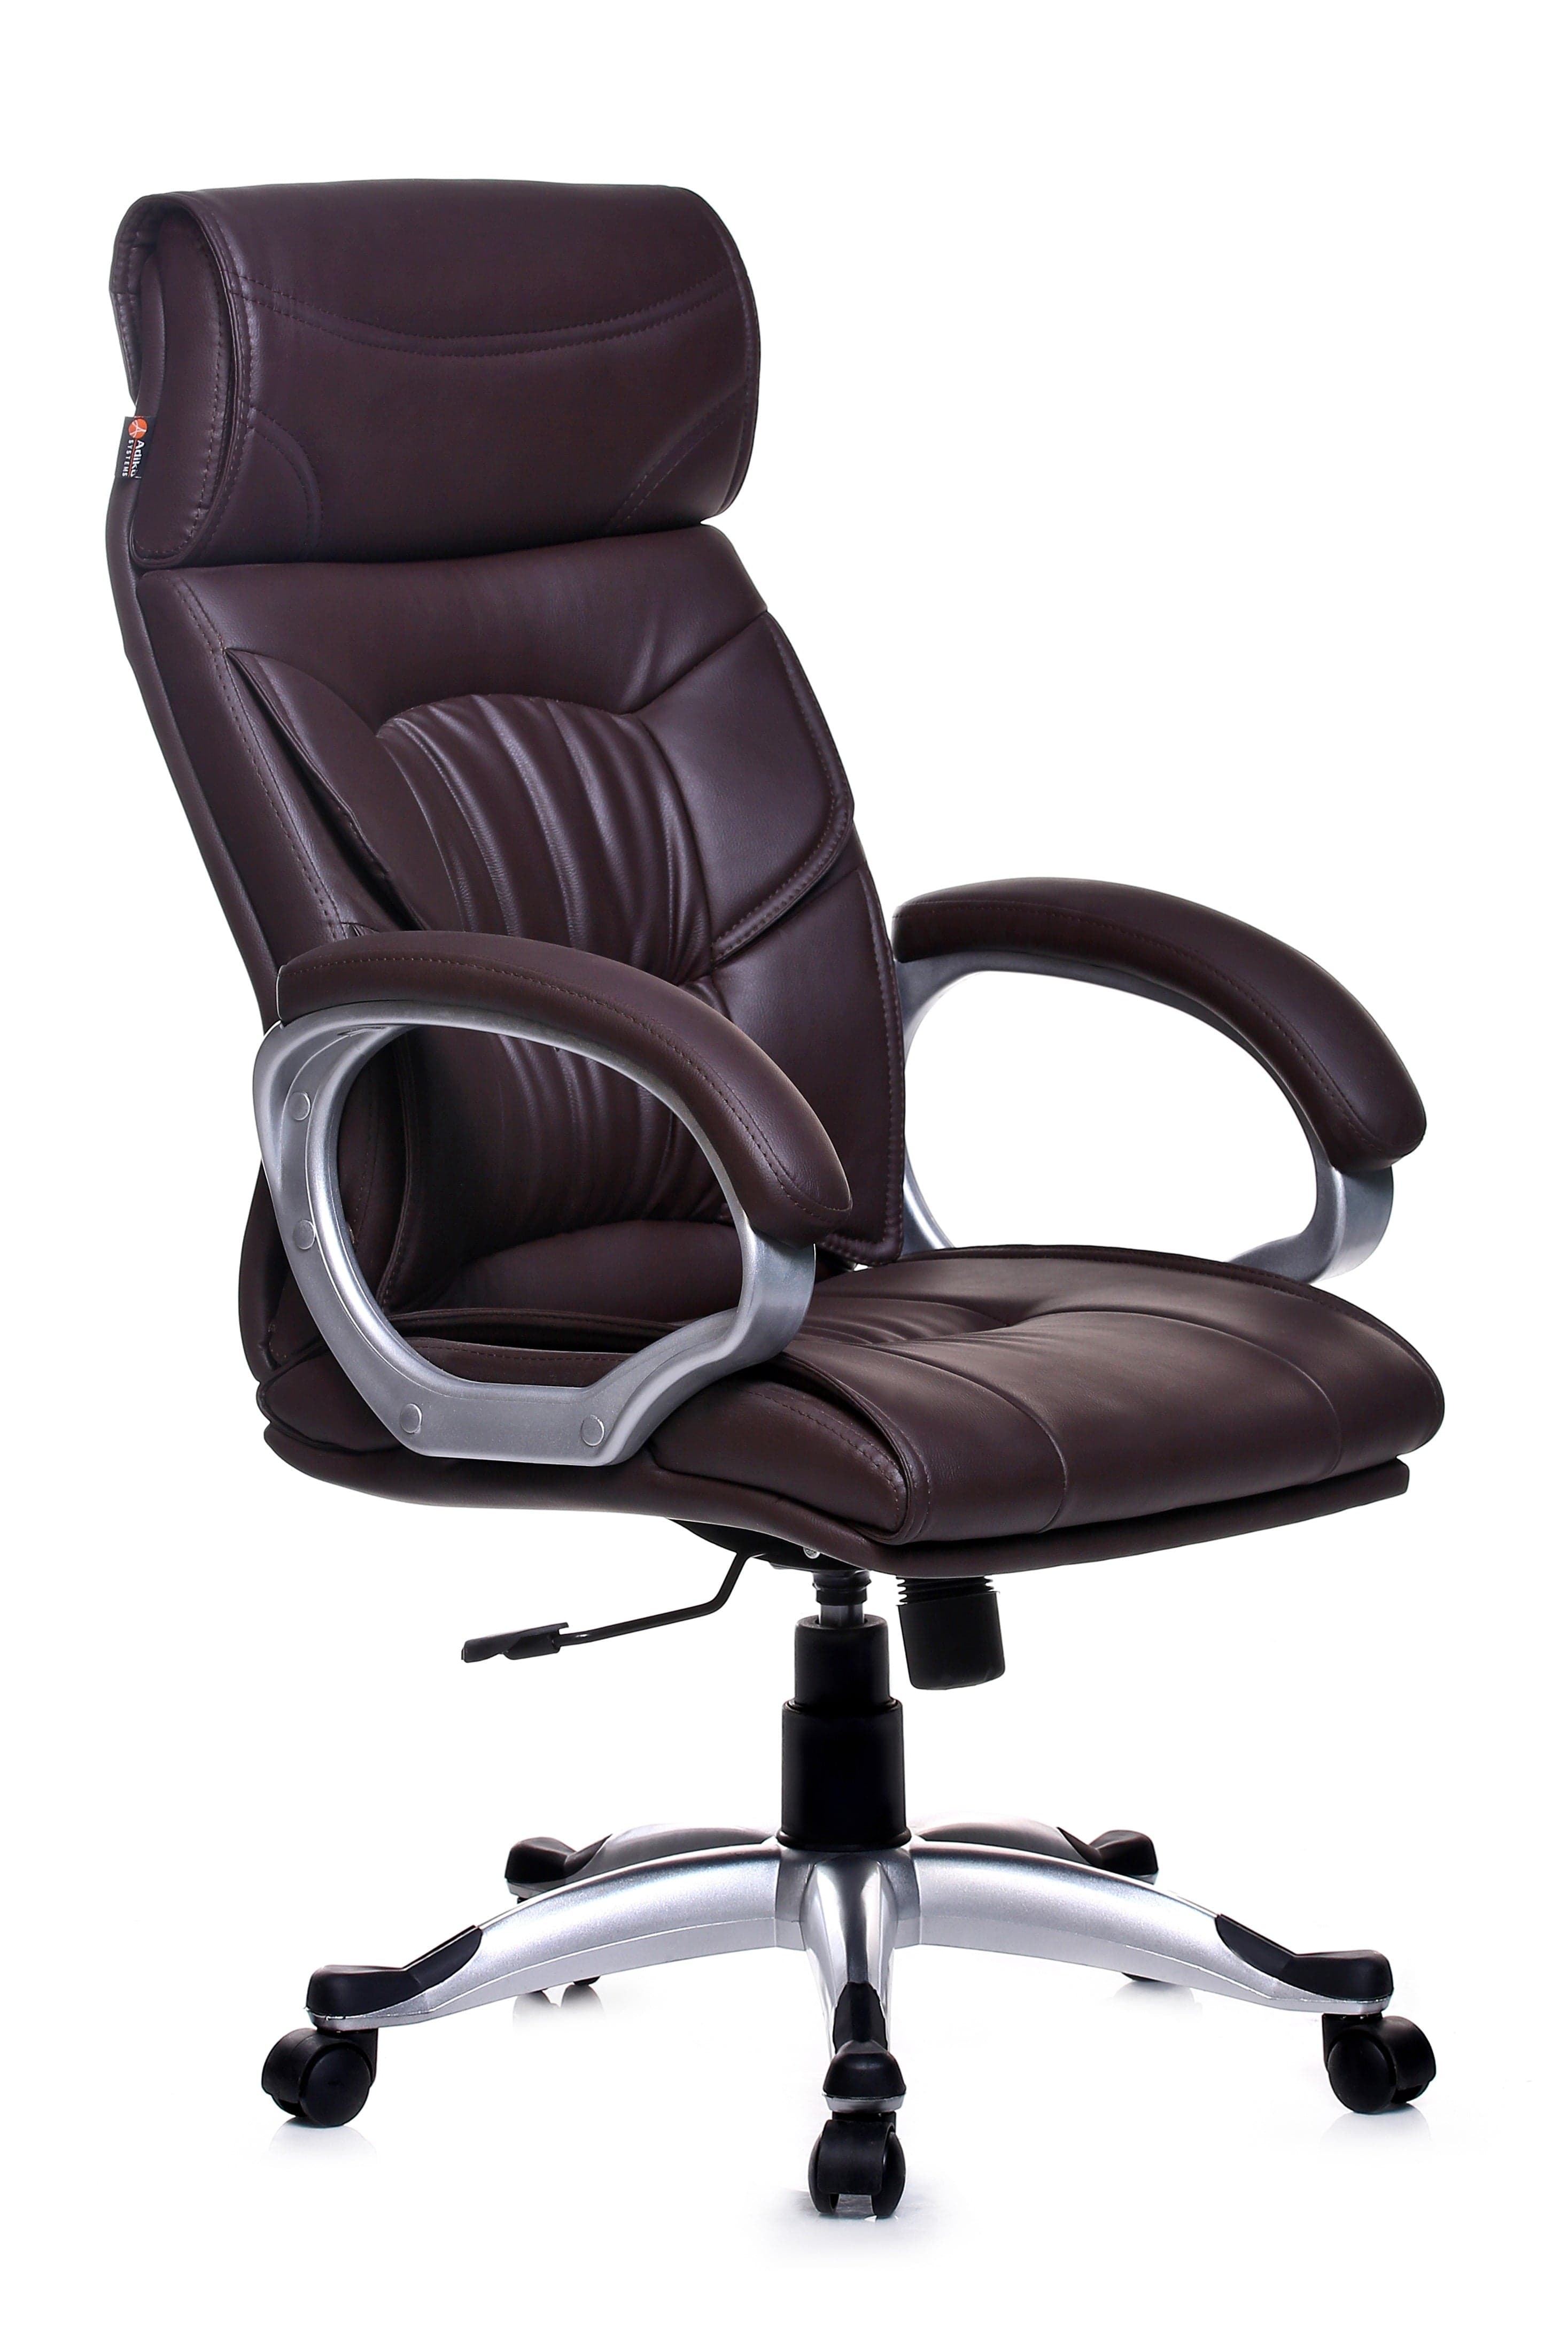 Stylish Executive Chair in Brown Colour by Adiko Systems